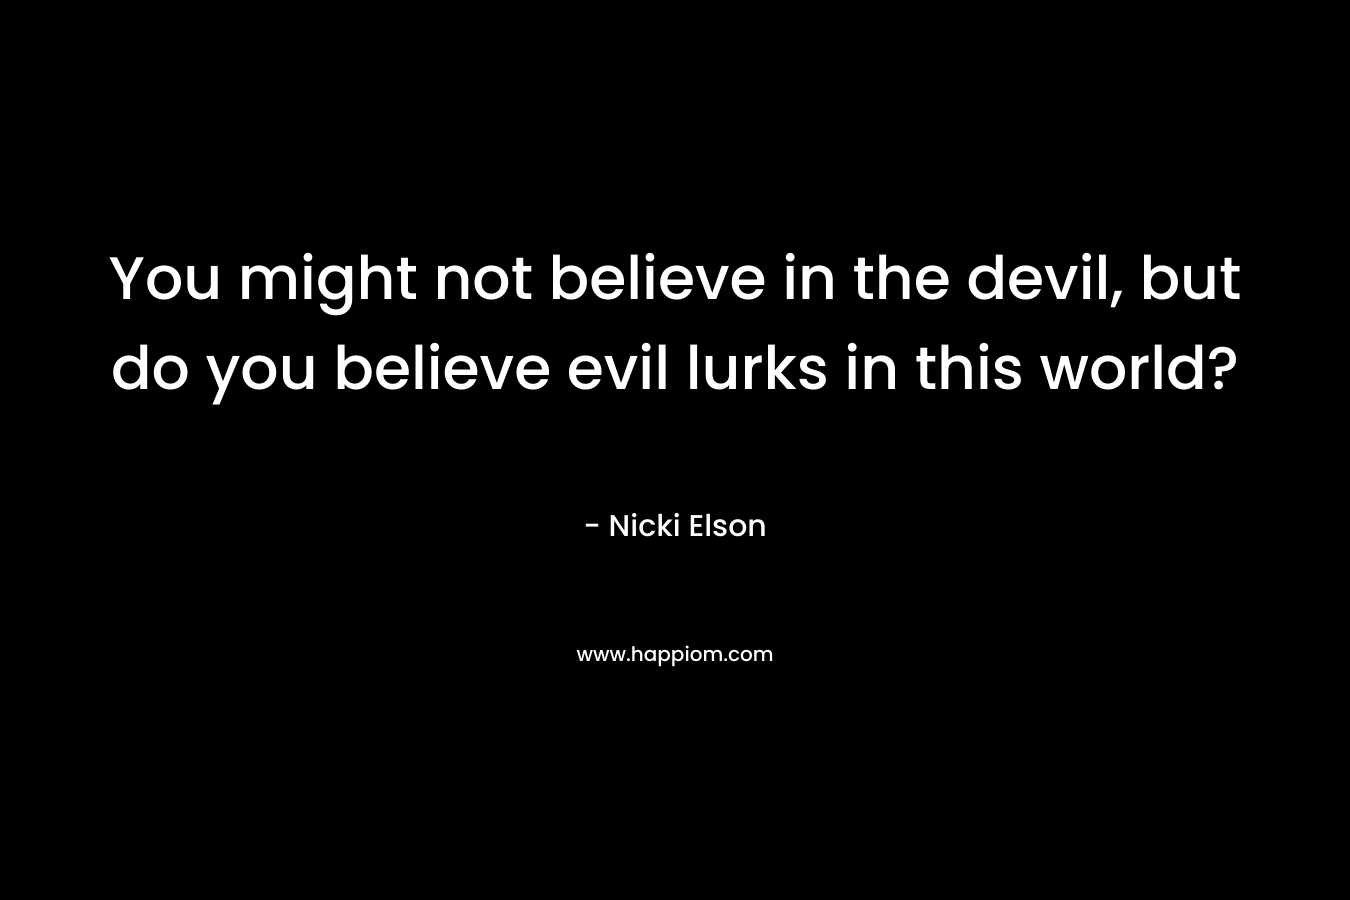 You might not believe in the devil, but do you believe evil lurks in this world?